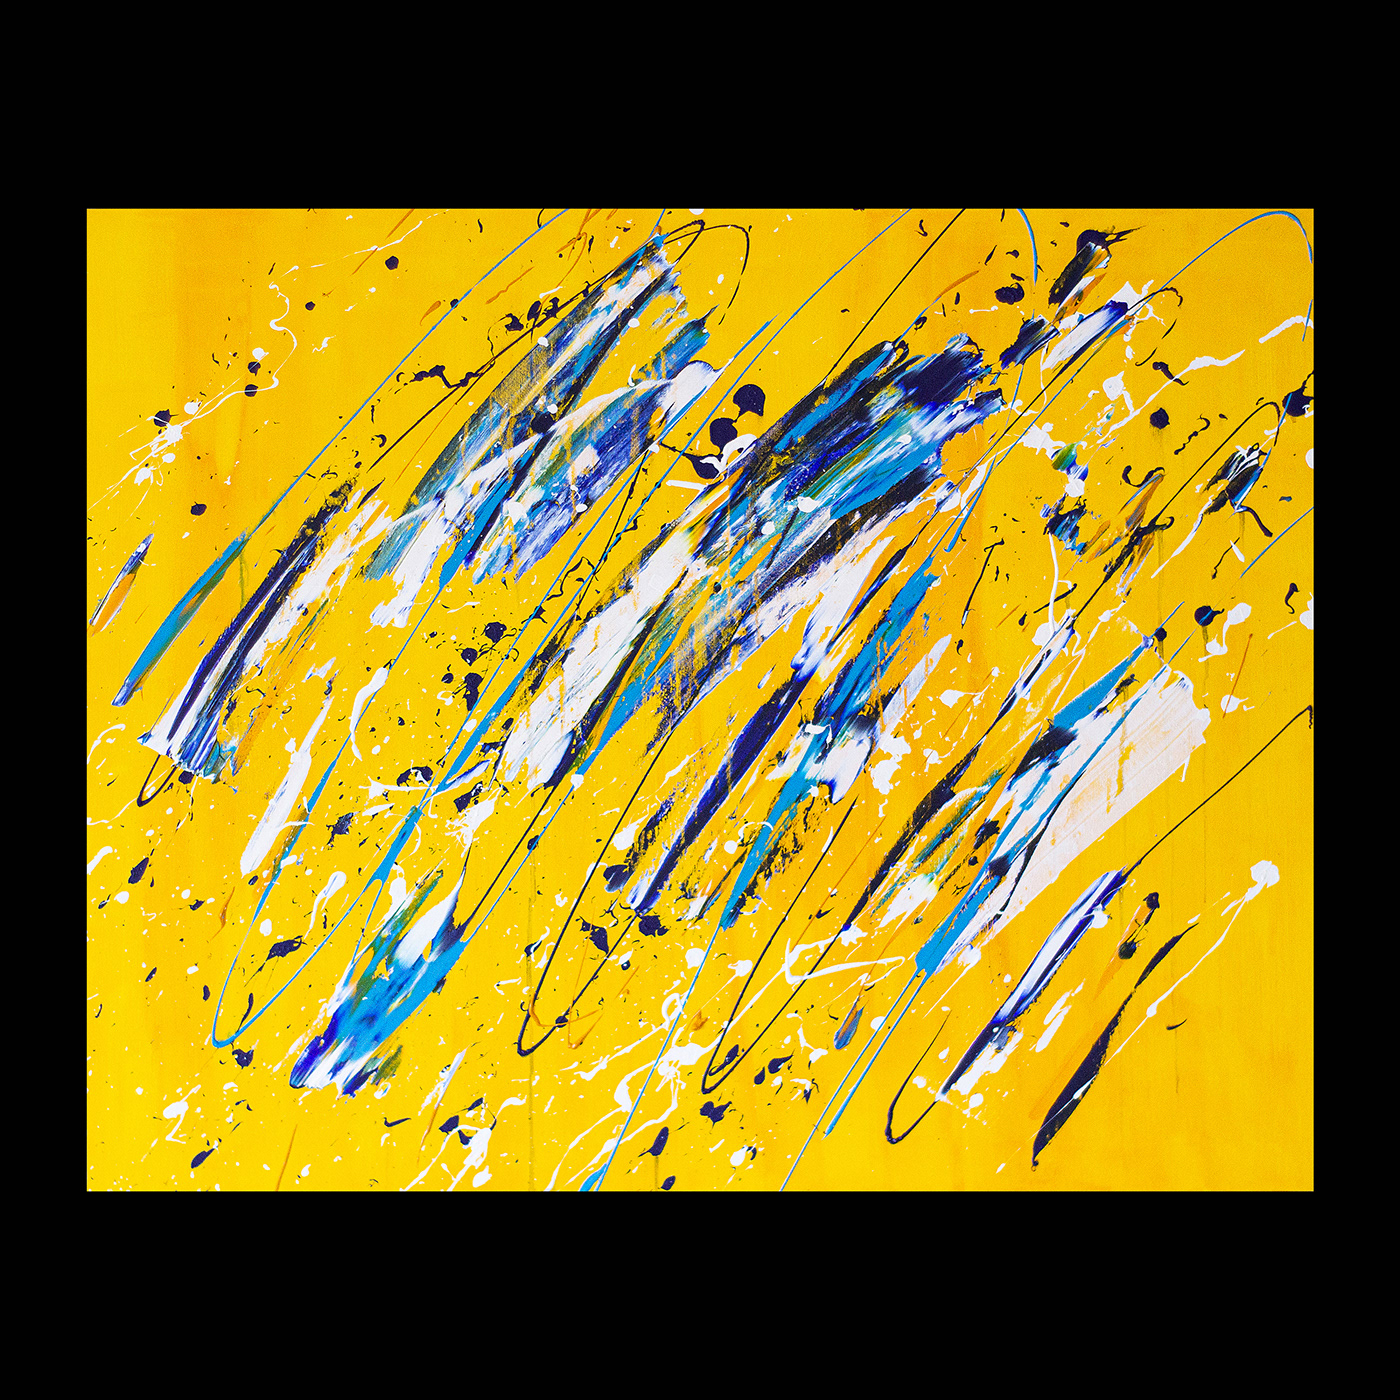 abstract abstract painting painting   pittura pittura astratta abstractart ALLEN SOLANO abstraction acrylic canvas